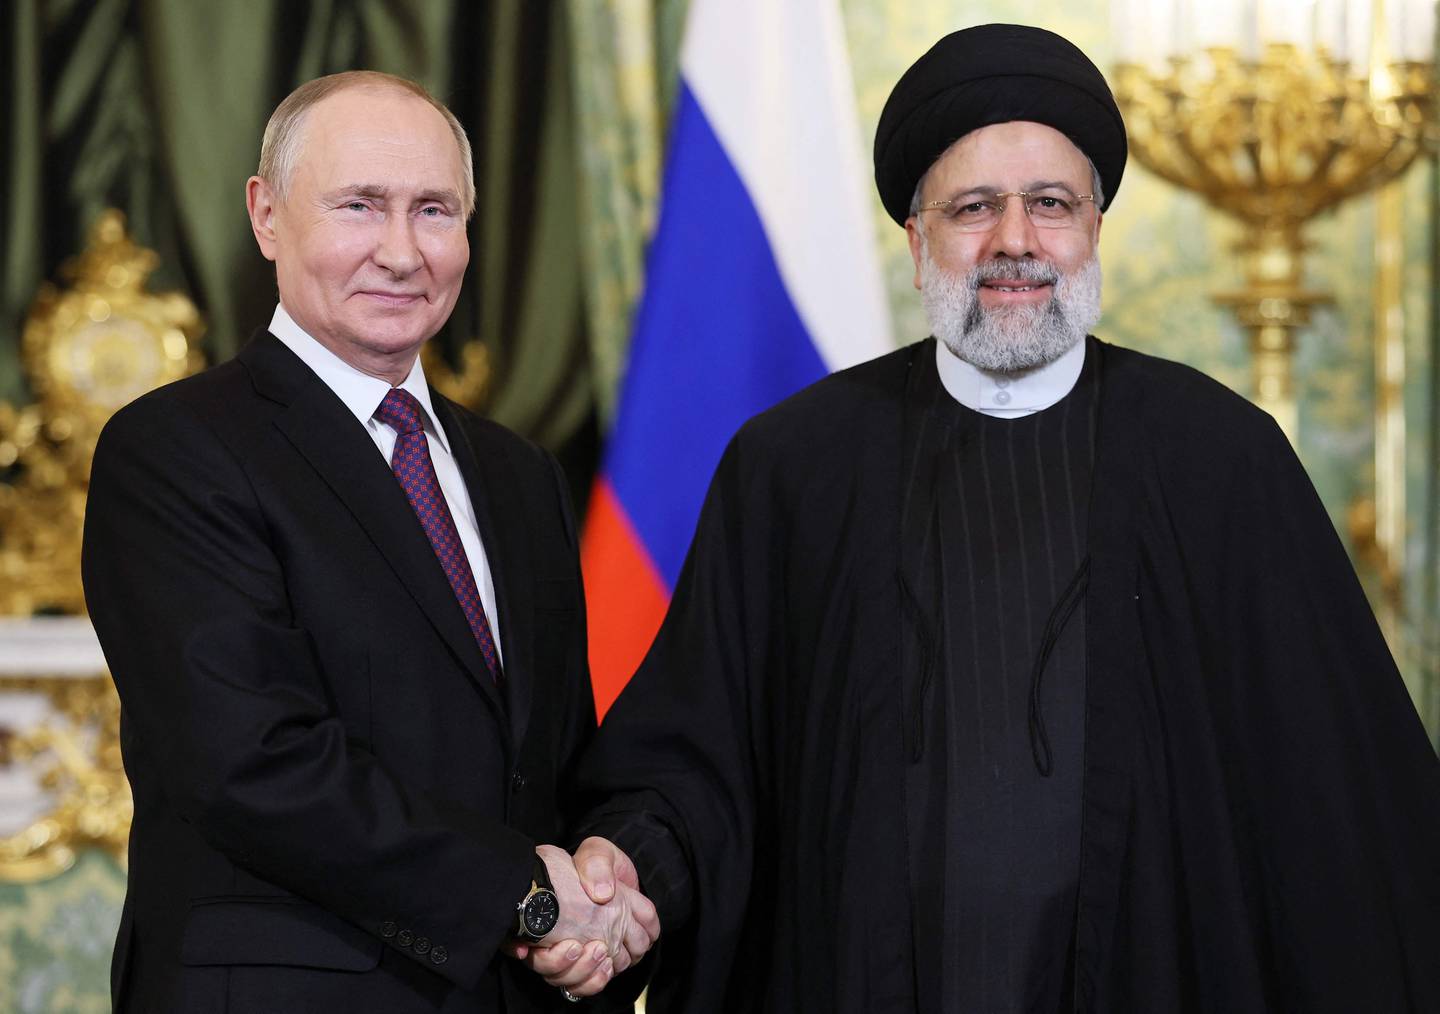 In this pool photograph distributed by Russian news agency Sputnik on December 7, 2023, Russia's President Vladimir Putin (L) shakes hands with Iran's President Ebrahim Raisi during their meeting in the Kremlin in Moscow. (Photo by Sergei BOBYLYOV / POOL / AFP) / Editor's note : this image is distributed by Russian state owned agency Sputnik